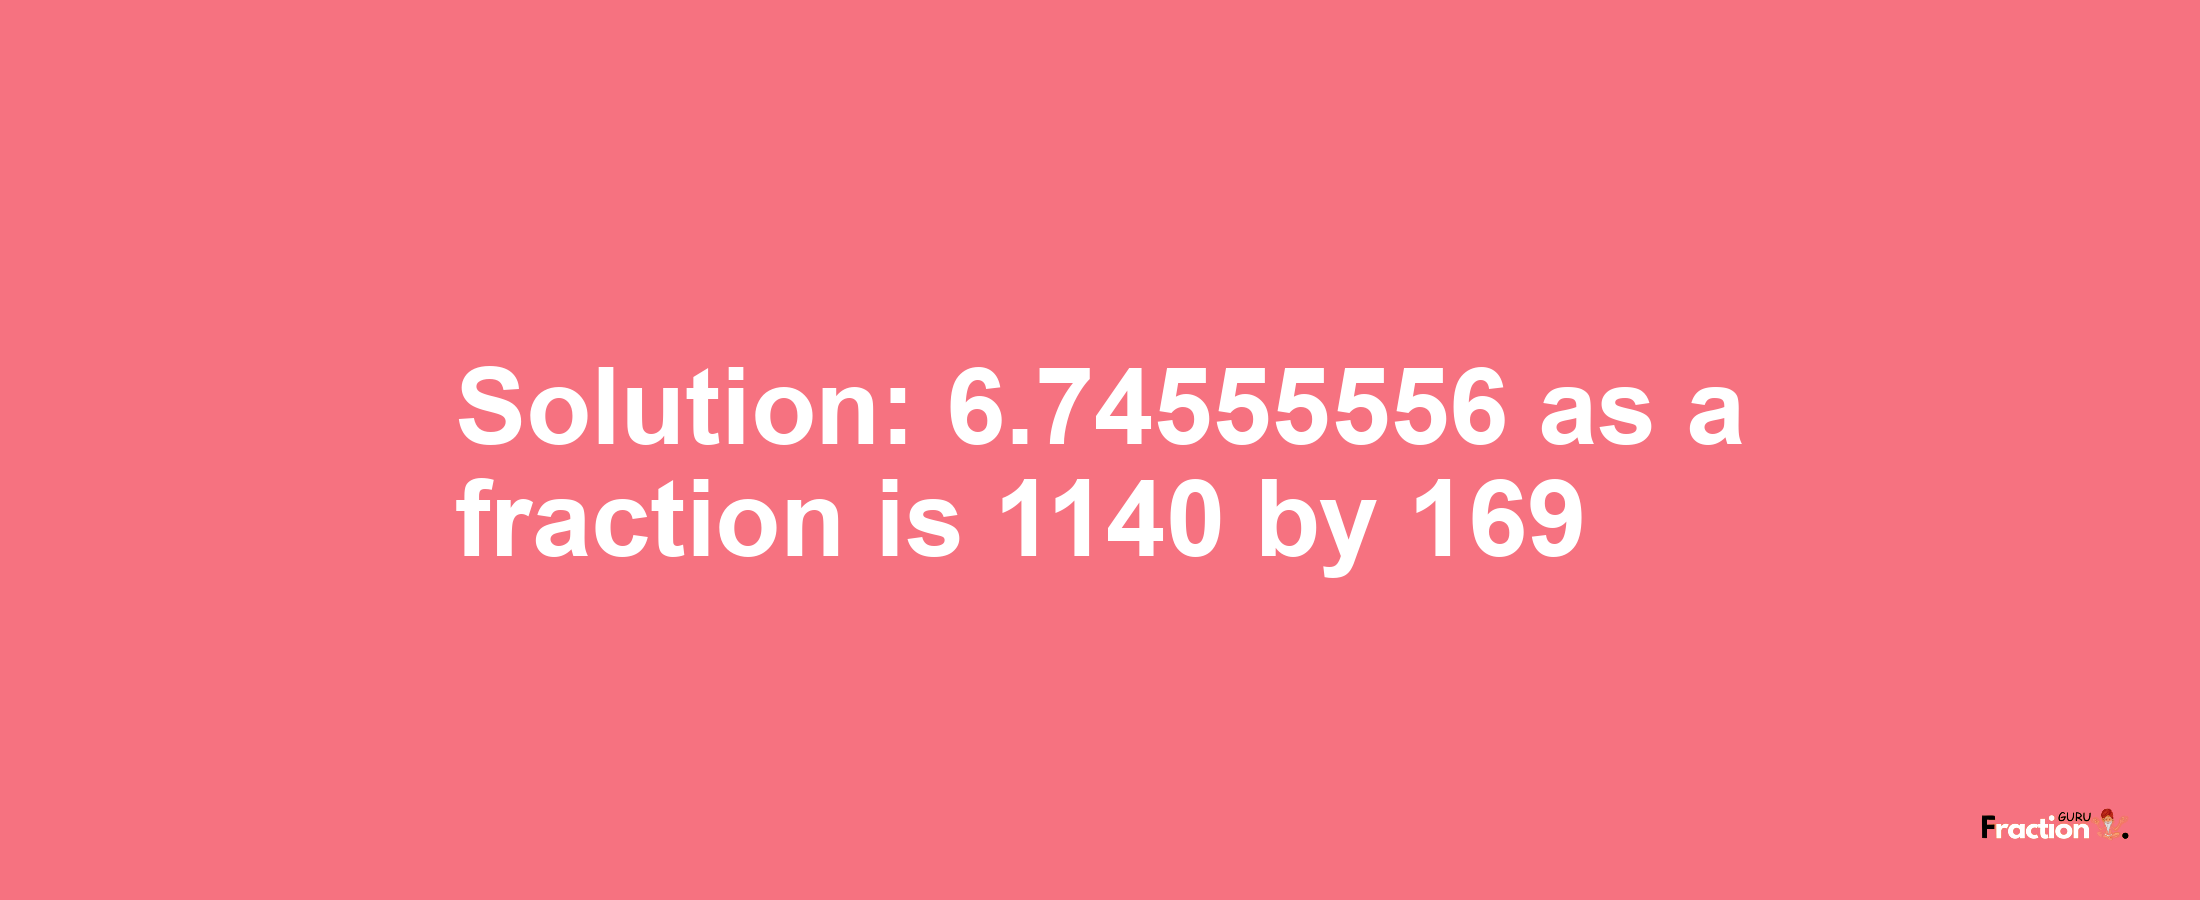 Solution:6.74555556 as a fraction is 1140/169